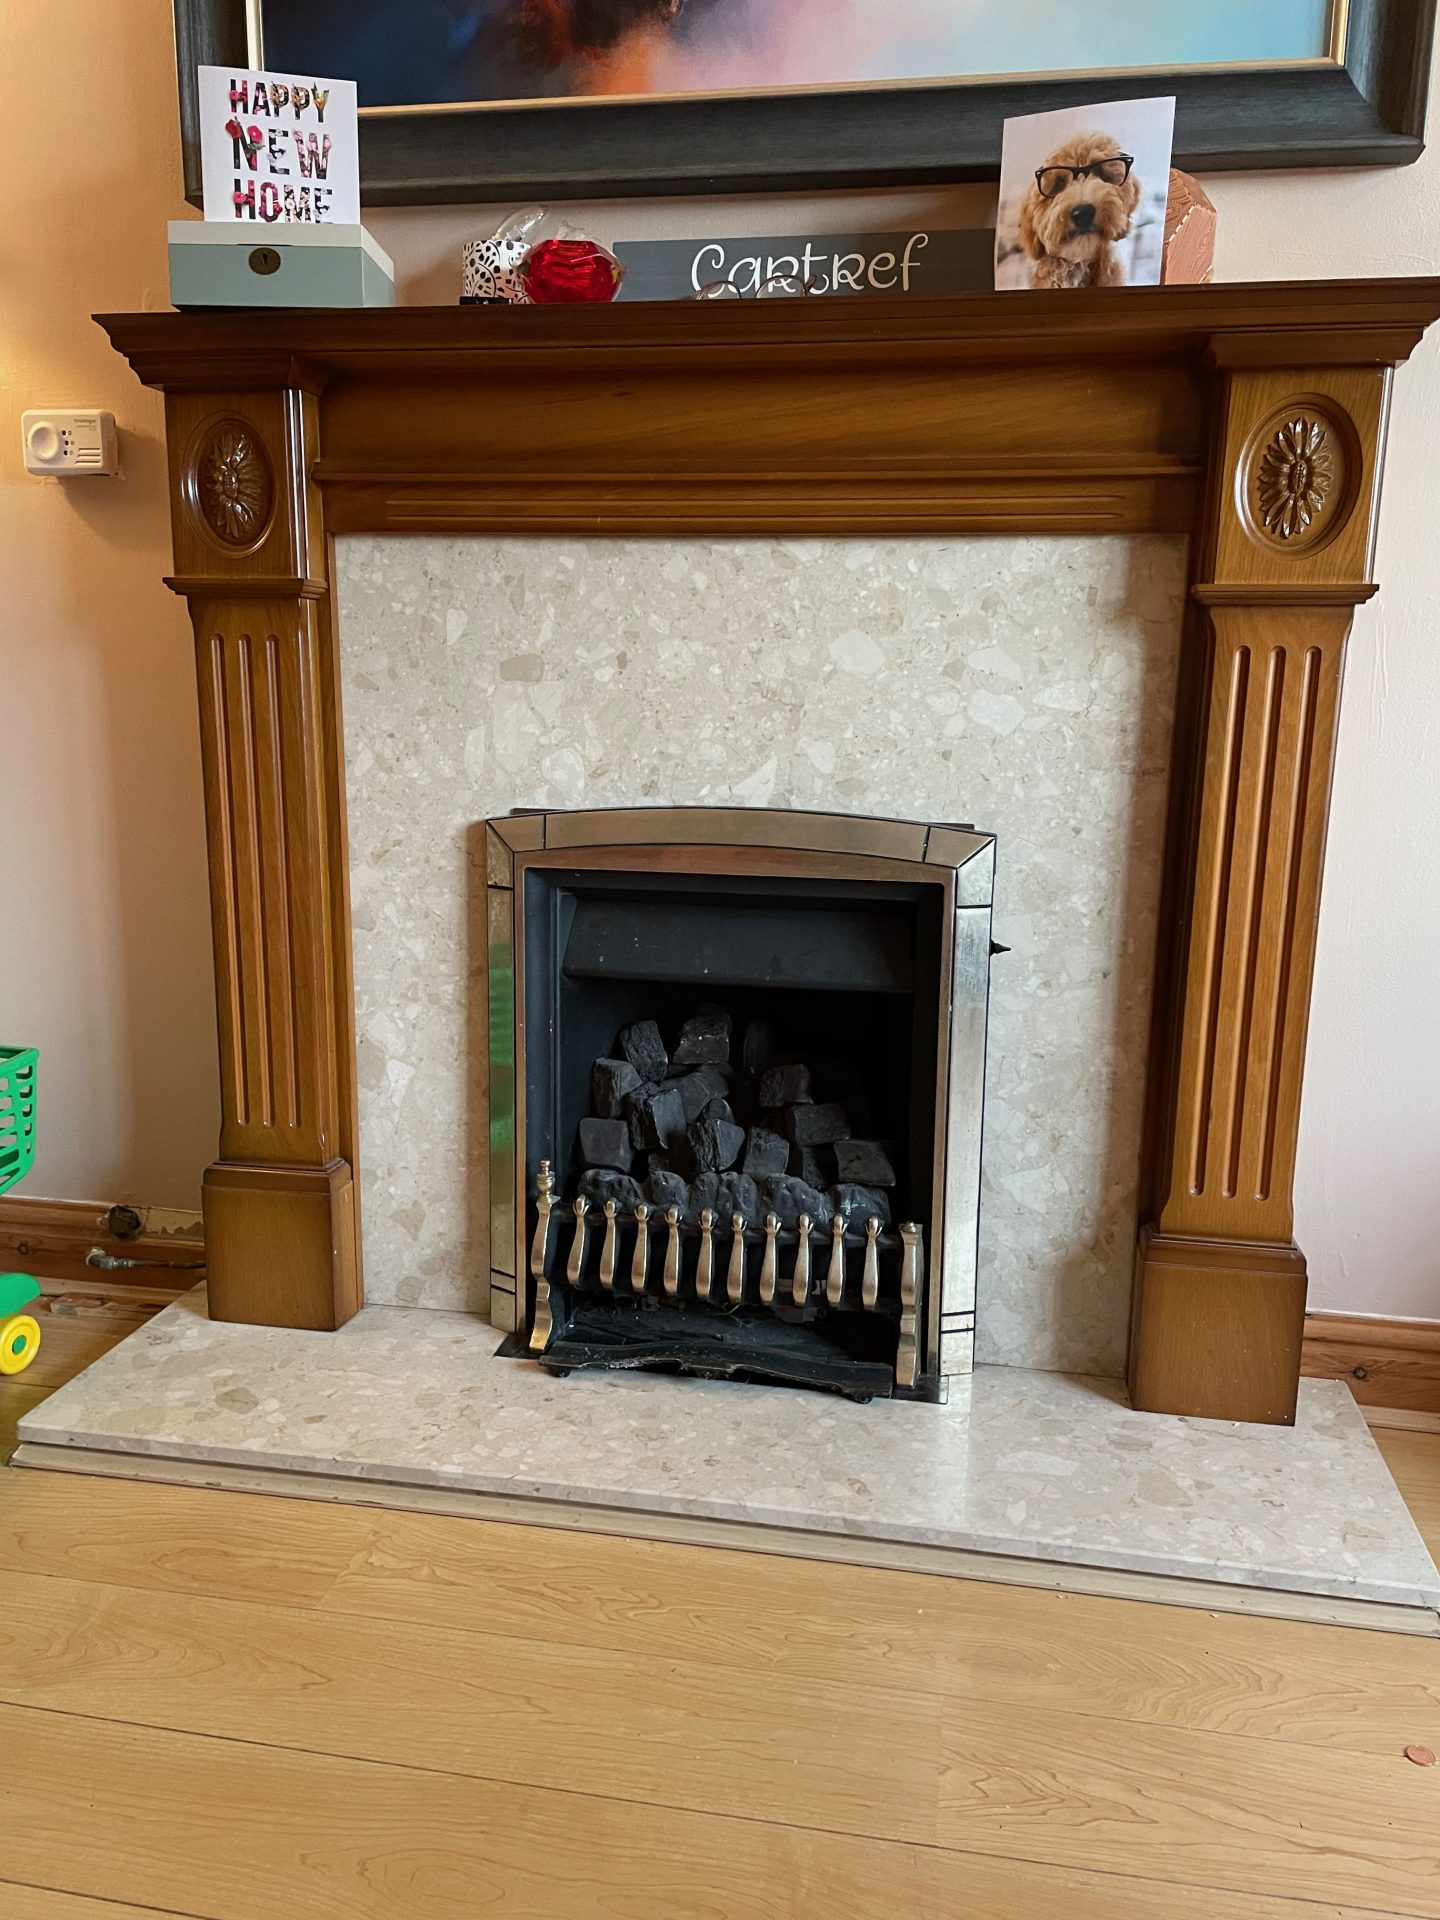 Image of a gas fire place which is going to be removed.